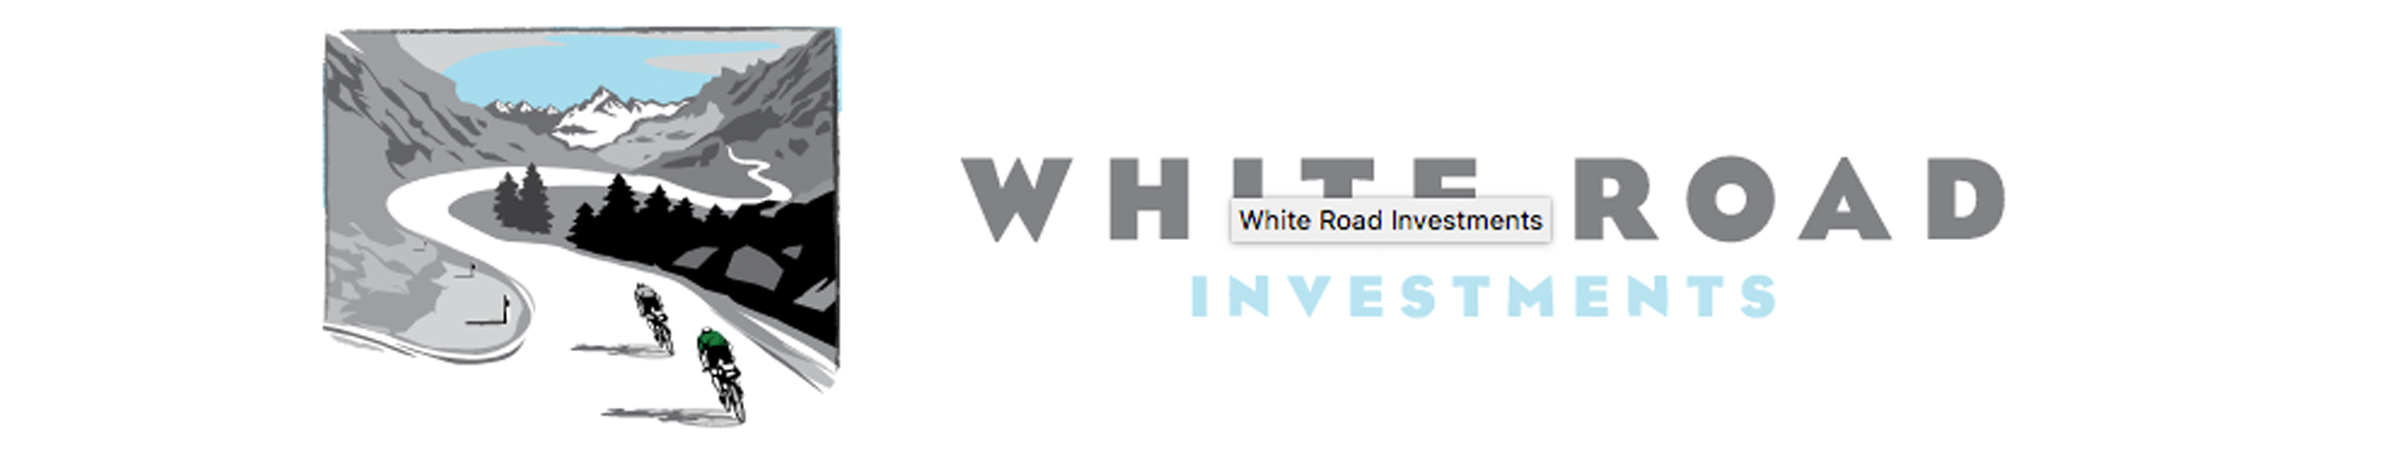 White Road Investments Logo.png